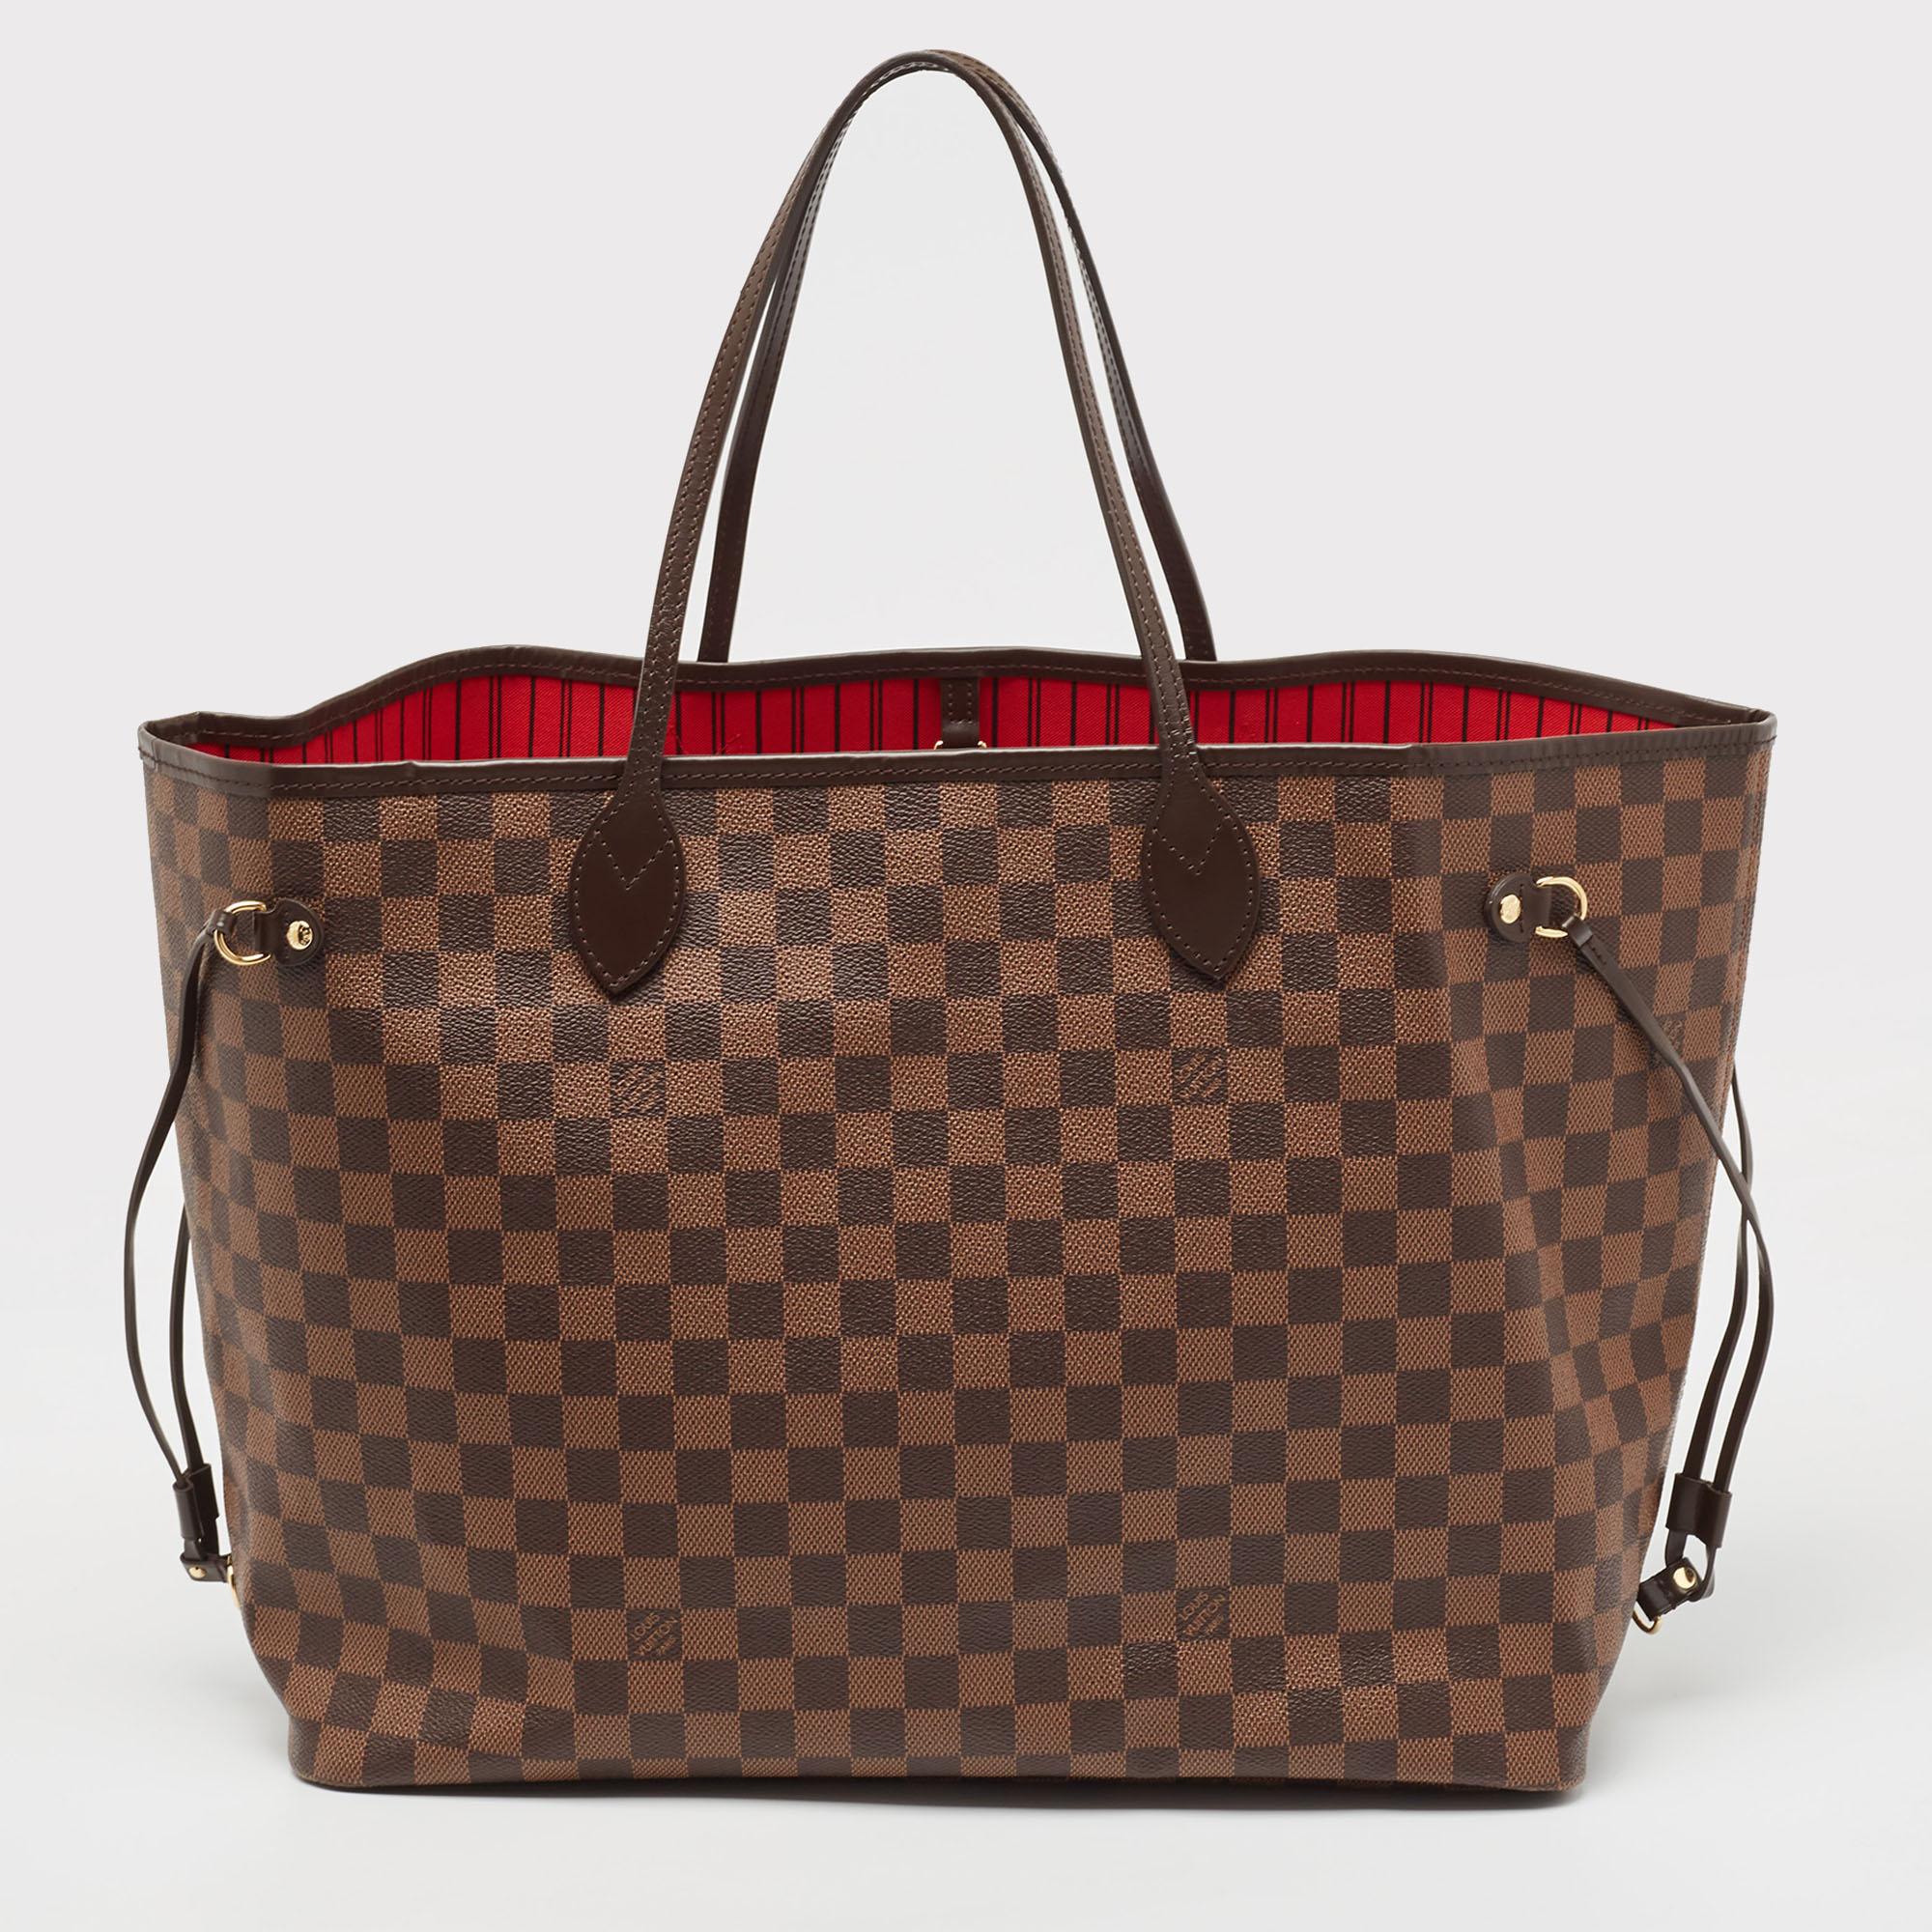 Louis Vuitton’s Neverfull was first introduced in 2007. Crafted from classic Damier Ebene canvas, Neverfull is versatile in design. The bag features dual top handles and a fabric-lined spacious interior. Neverfull is the perfect everyday